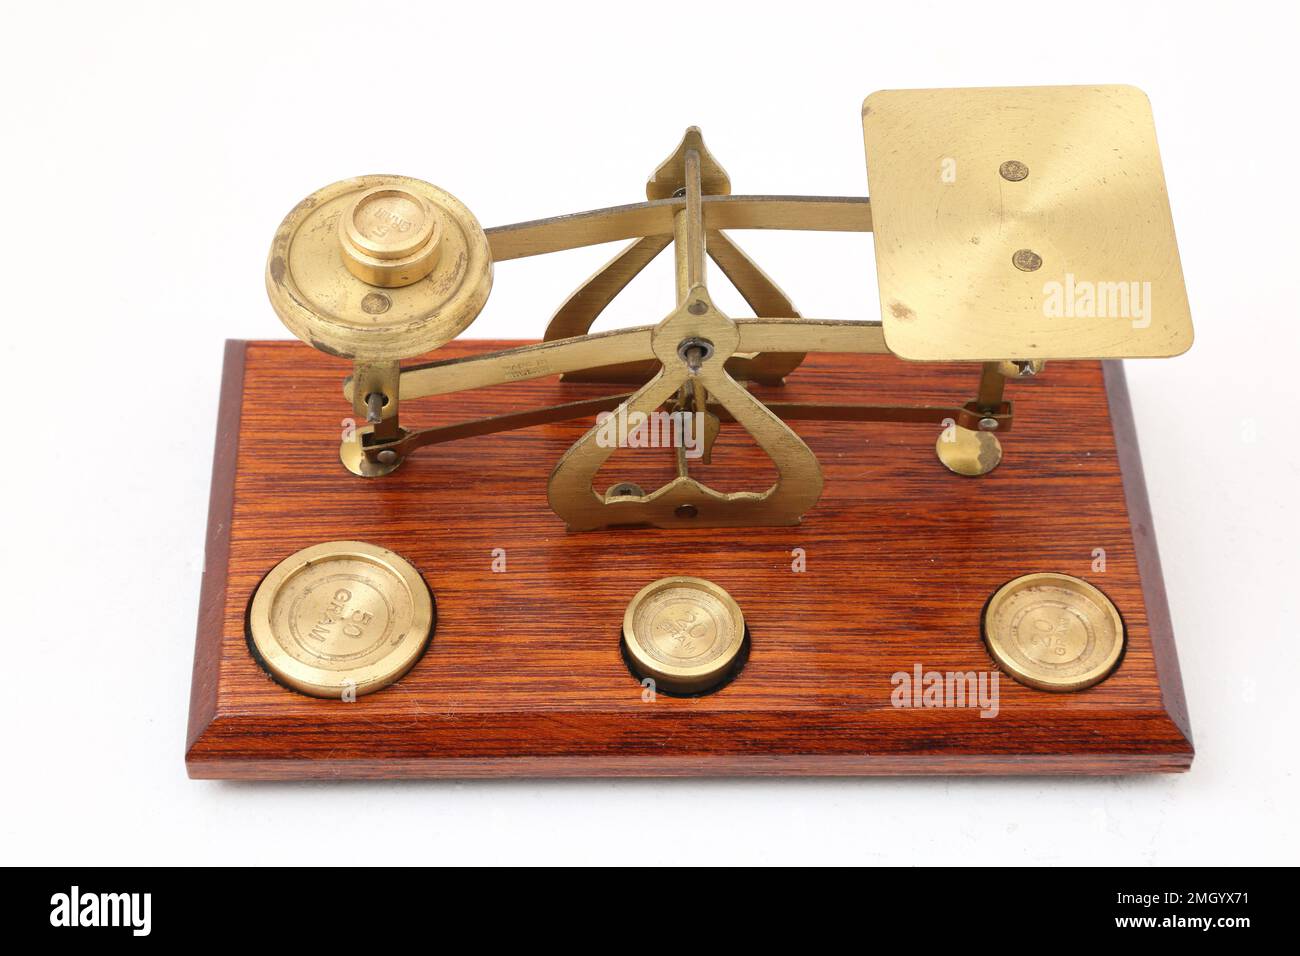 Vintage Brass and Wooden Weighing Scales with Weights Stock Photo